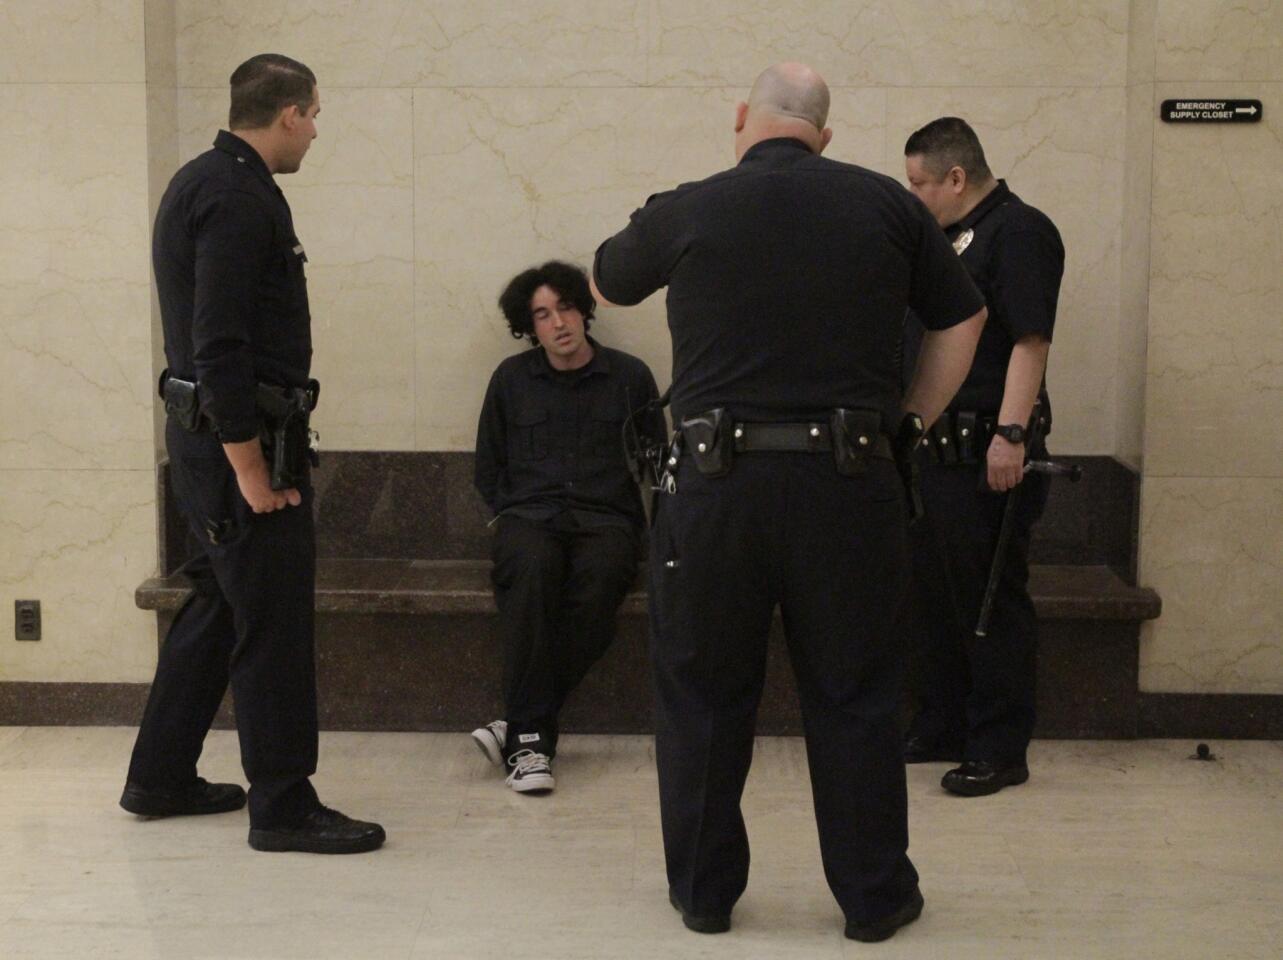 Los Angeles police talk to a man taken into custody in the lobby of the Los Angeles Times building in downtown Friday night after he allegedly made a threat. The man is an employee of VXI Global Solutions, a tenant in the building.